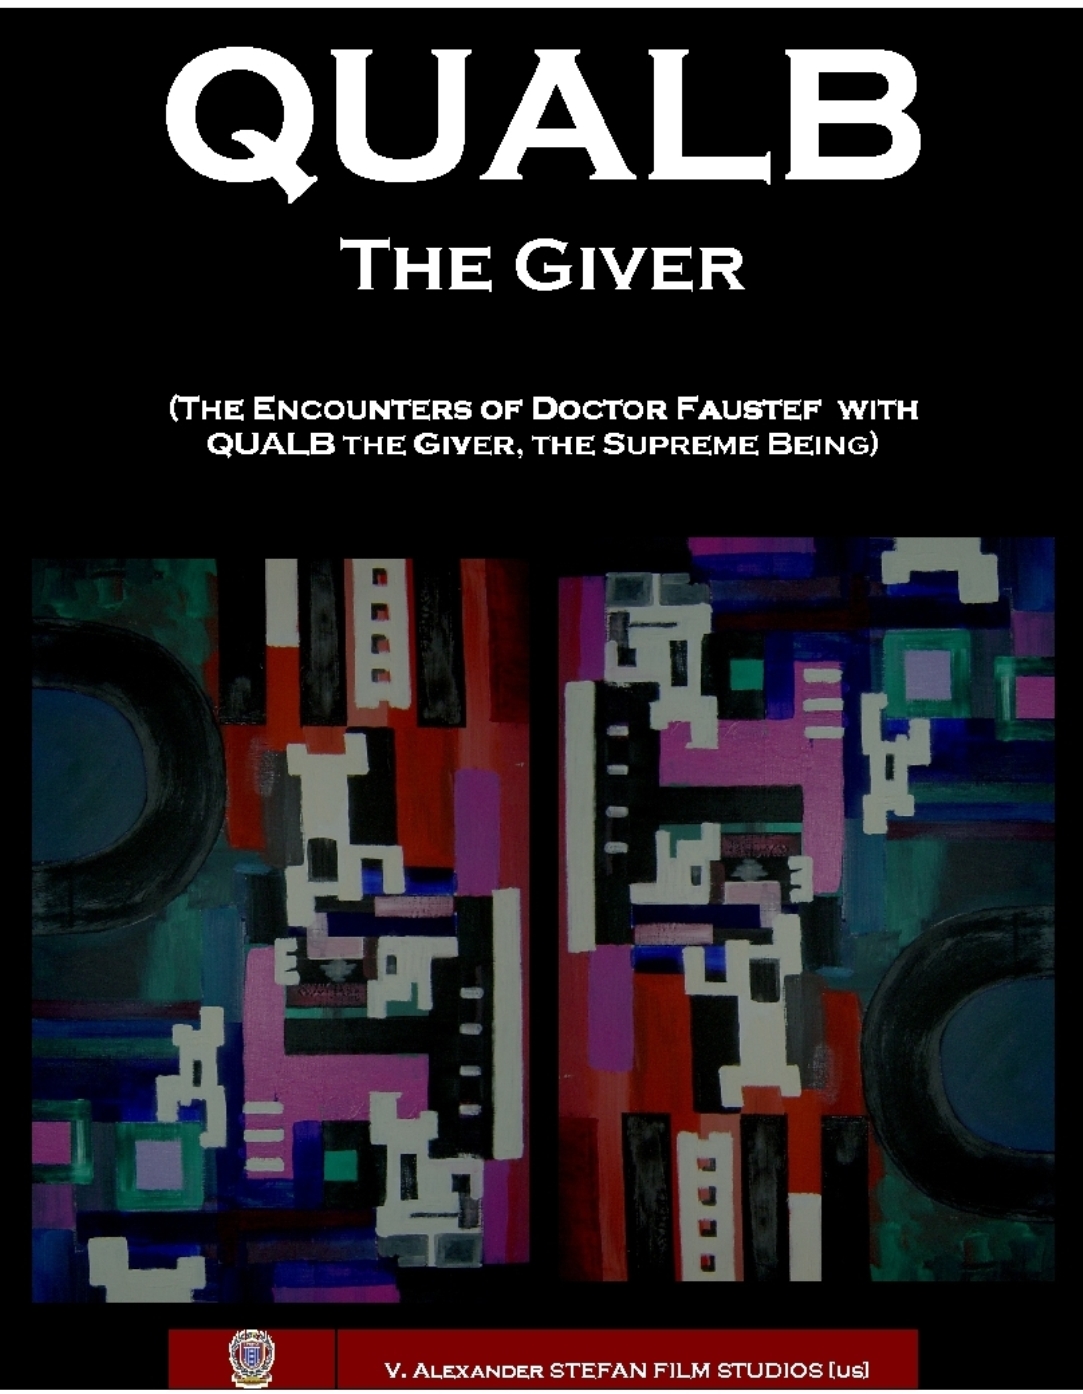 (2010) book. V. Alexander STEFAN, QUALB the Giver(The Encounters of Doctor Faustef with QUALB the Giver, the Supreme Being) The book deals with the encounters of Doctor Faustef with QUALB, the Supreme Being. It is based on the Faustef Trilogy, including the events, described in the Trilogy, whereby Faustef encounters QUALB the Giver. Faustef achieved the immortality code-13, on February 11, 2001, and since has been performing the travels through the multidimensional time: back and forth, left and right, and up and down. Consequently, some events from the past may follow the events from the future. Faustef is given the post of the Master Guardian of the 22 Sibling Universes, including our Universe, by QUALB the Giver, the Supreme Being.